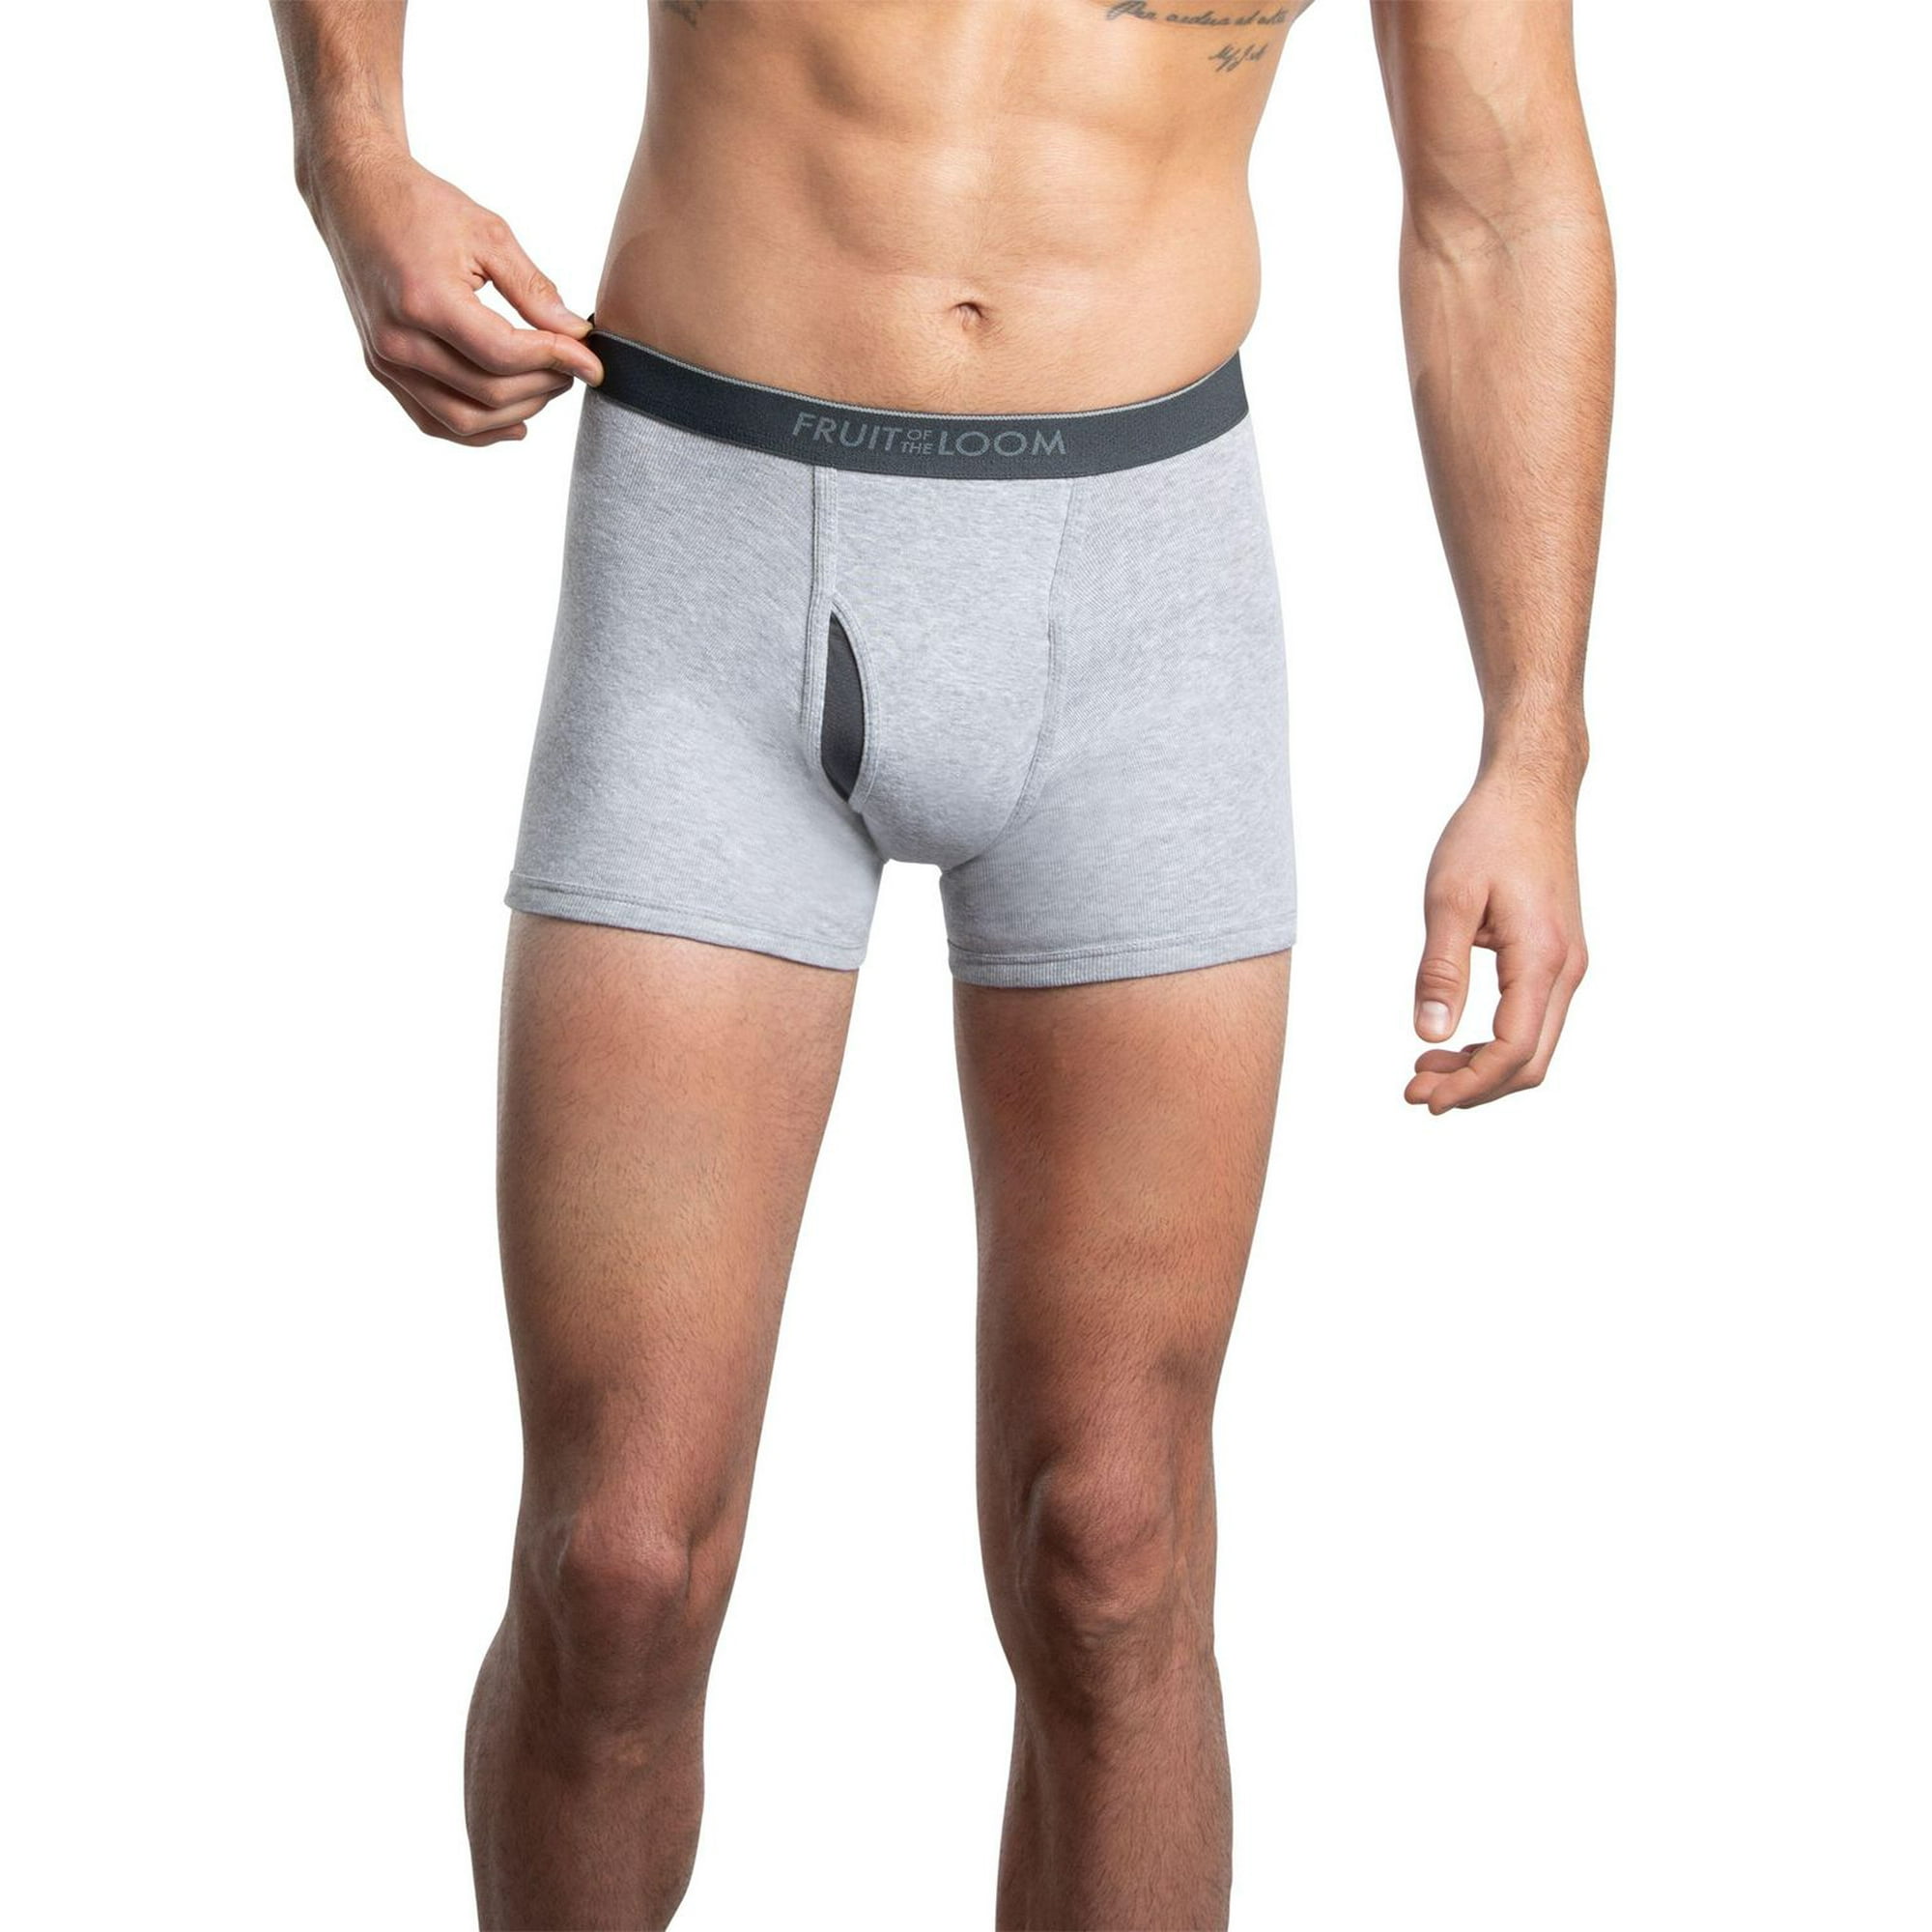 Fruit of the Loom - Tag-free CoolZone Fly boxer briefs, pk. of 3 - Plus  Size. Colour: charcoal. Size: 3xl